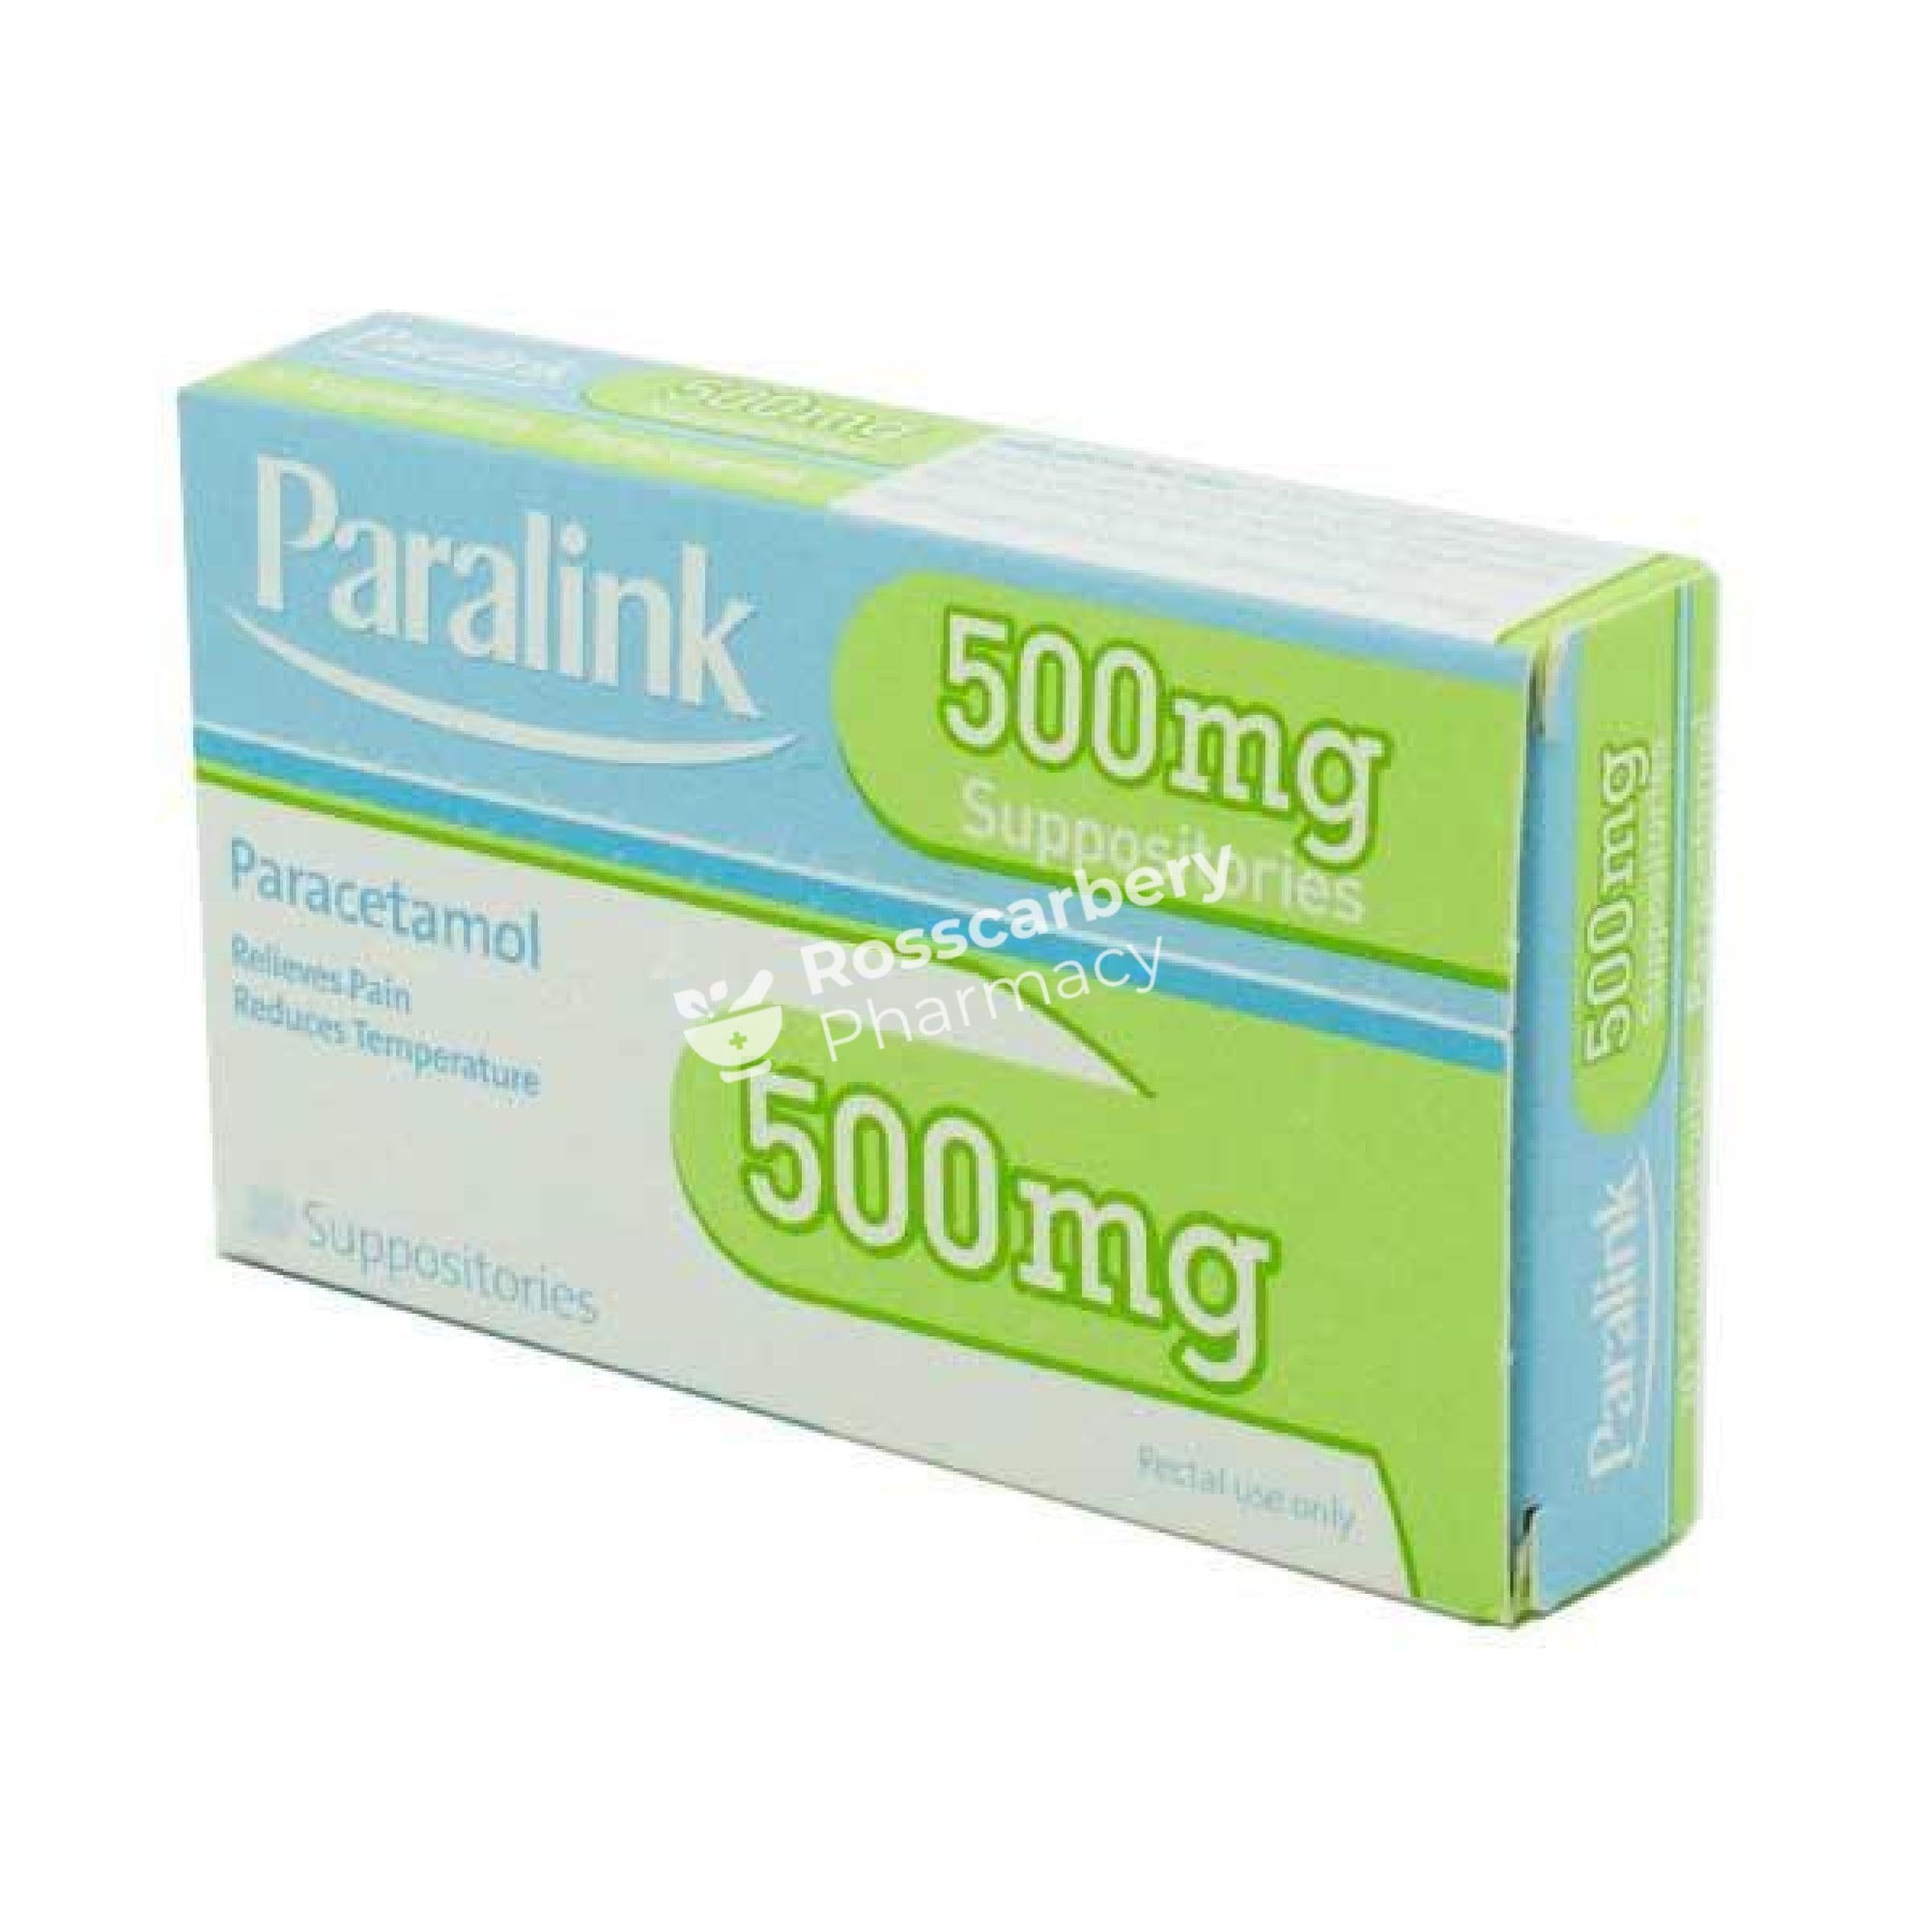 Paralink 500Mg Suppositories Paracetamol Childrens Pain Relief